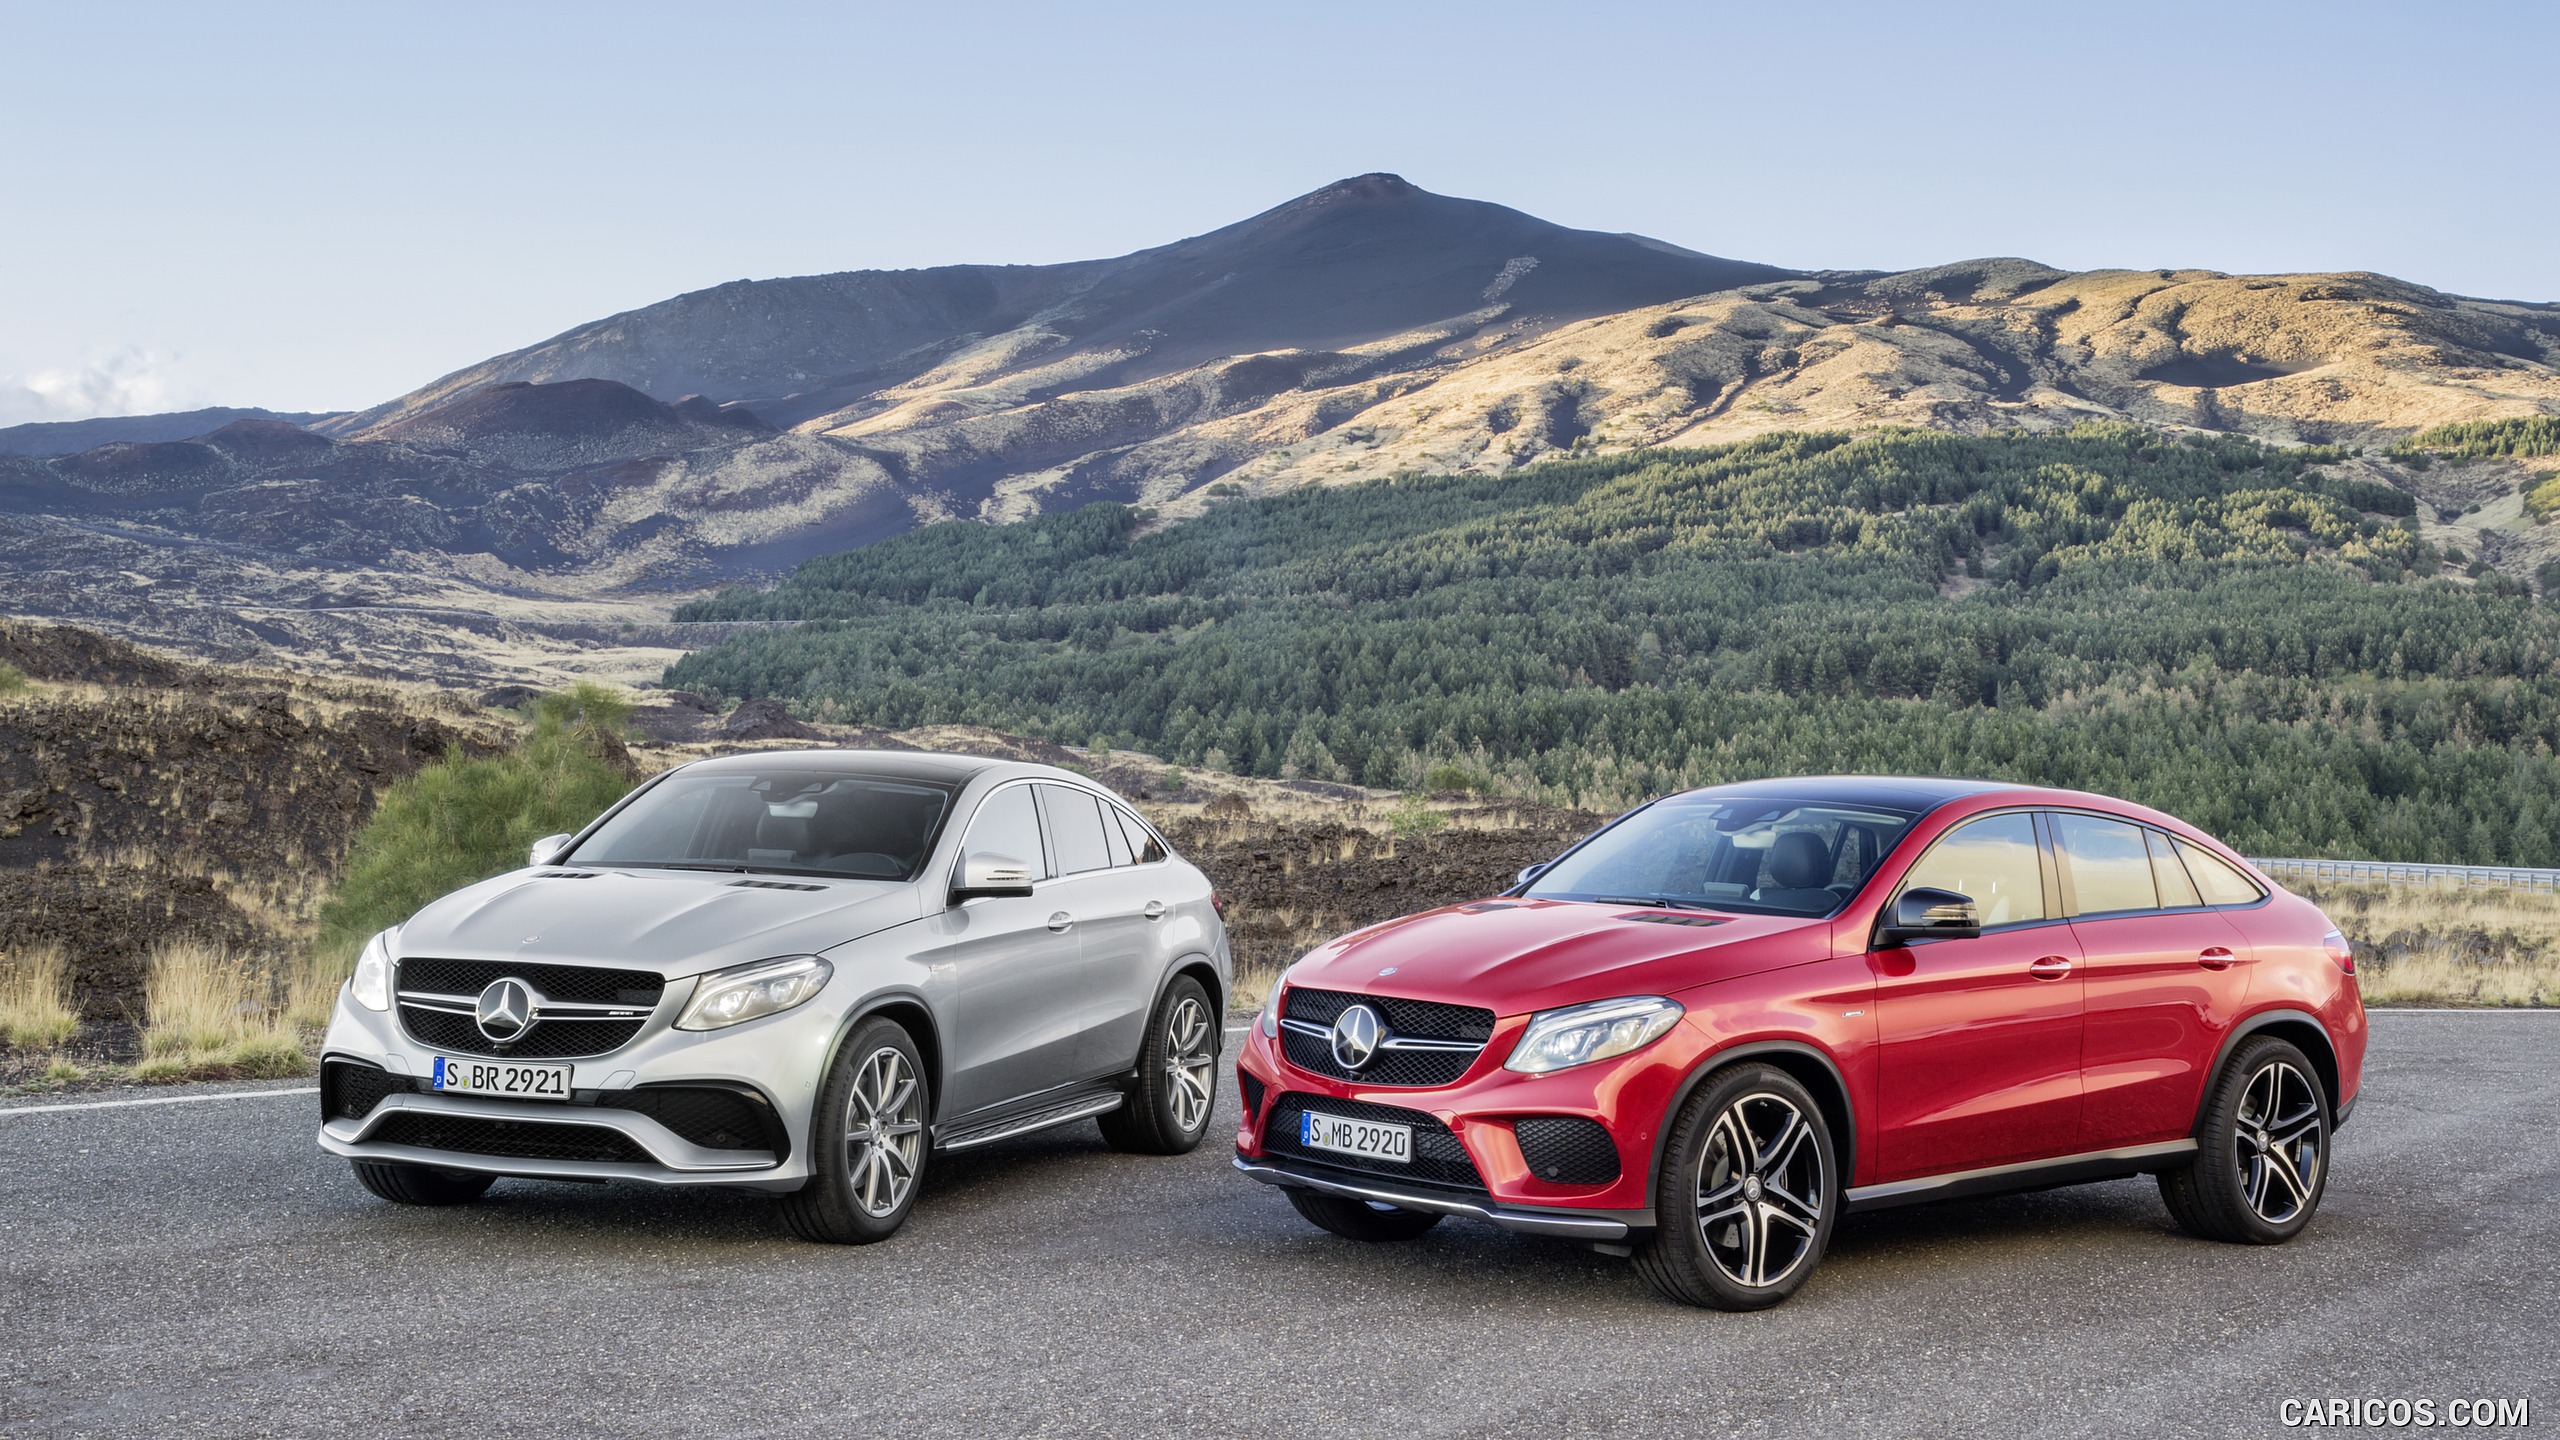 2016 Mercedes-AMG GLE 63 Coupe 4MATIC and GLE 450 AMG - Front, #38 of 65